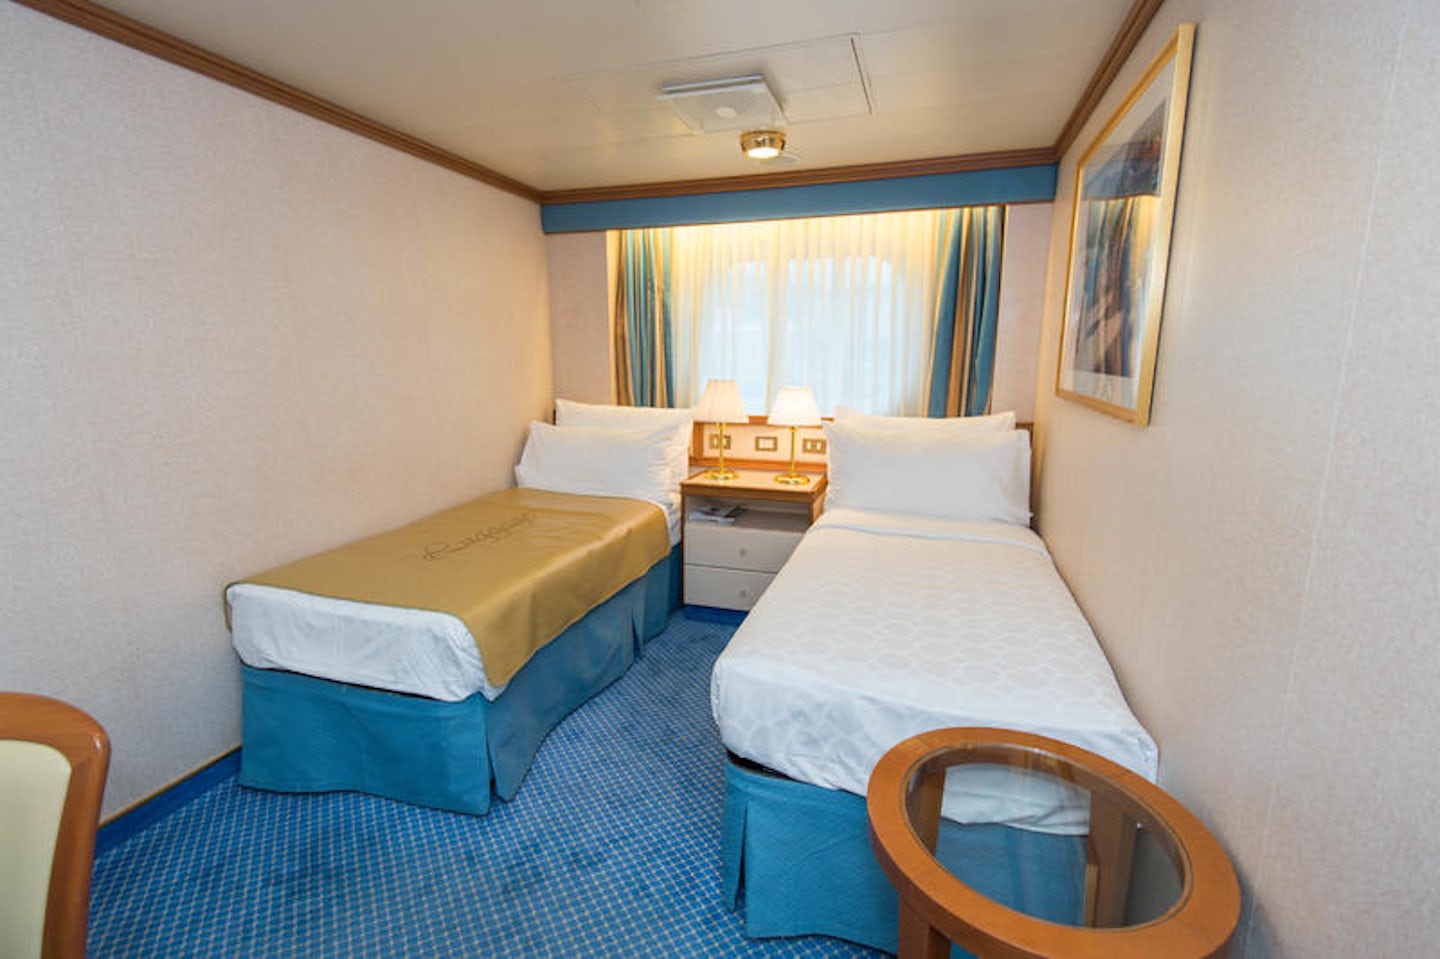 The Ocean-View Cabin on Ruby Princess